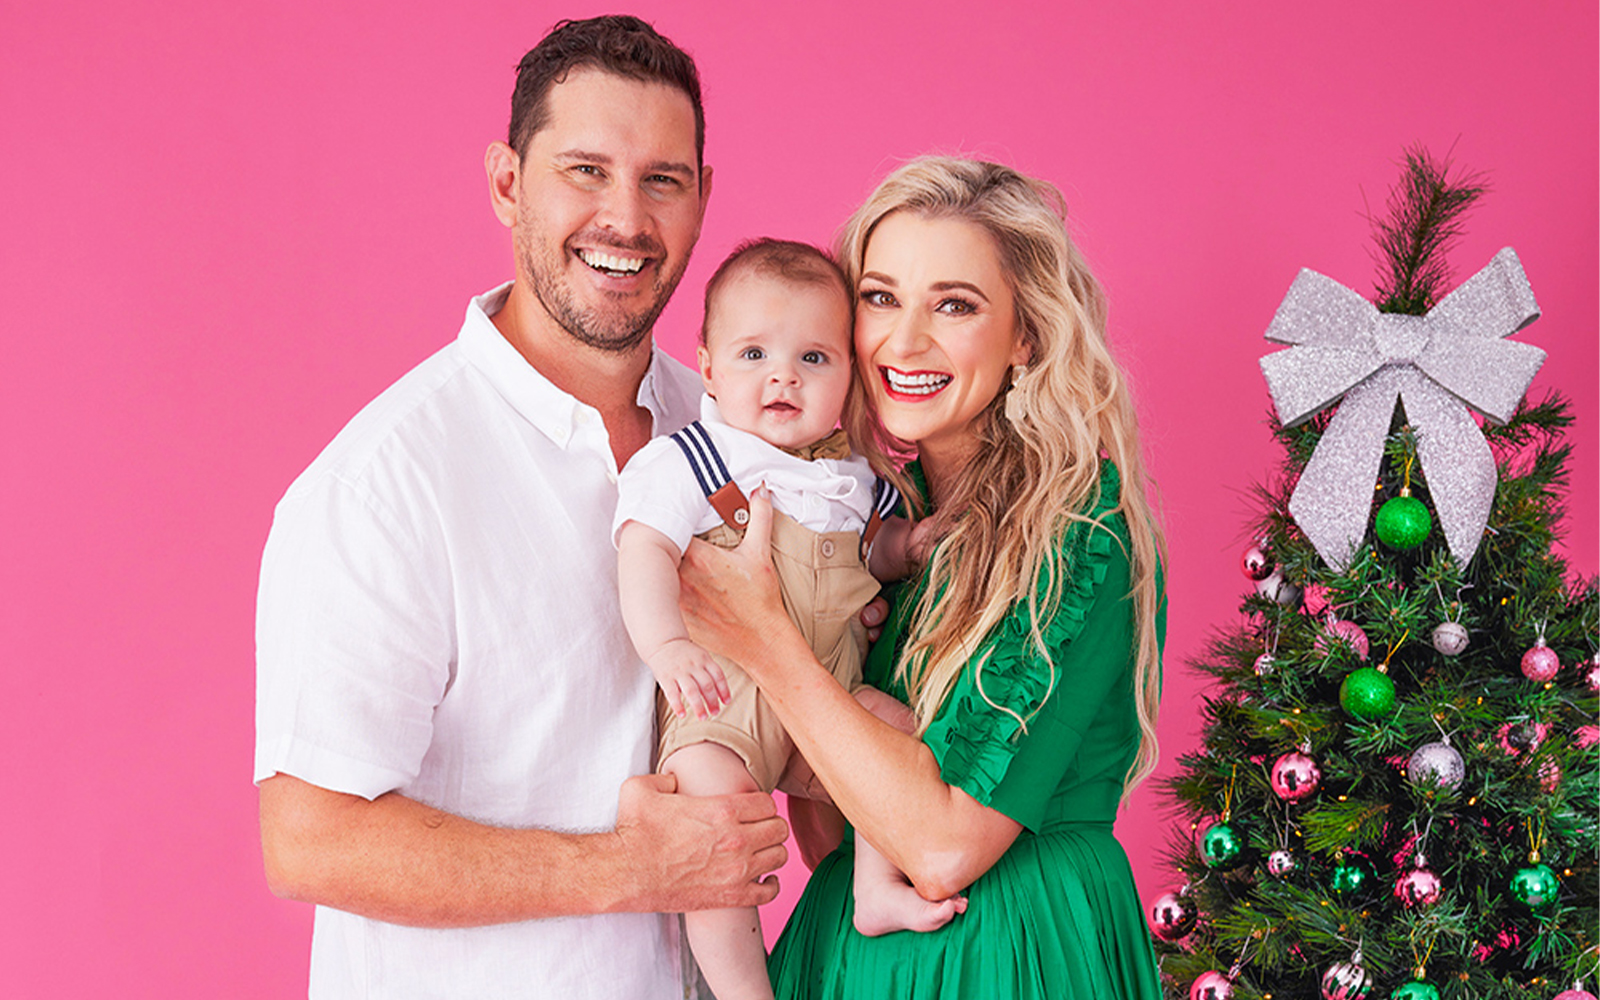 TV sweethearts Zac and Erin share their Christmas plans with baby Harrison